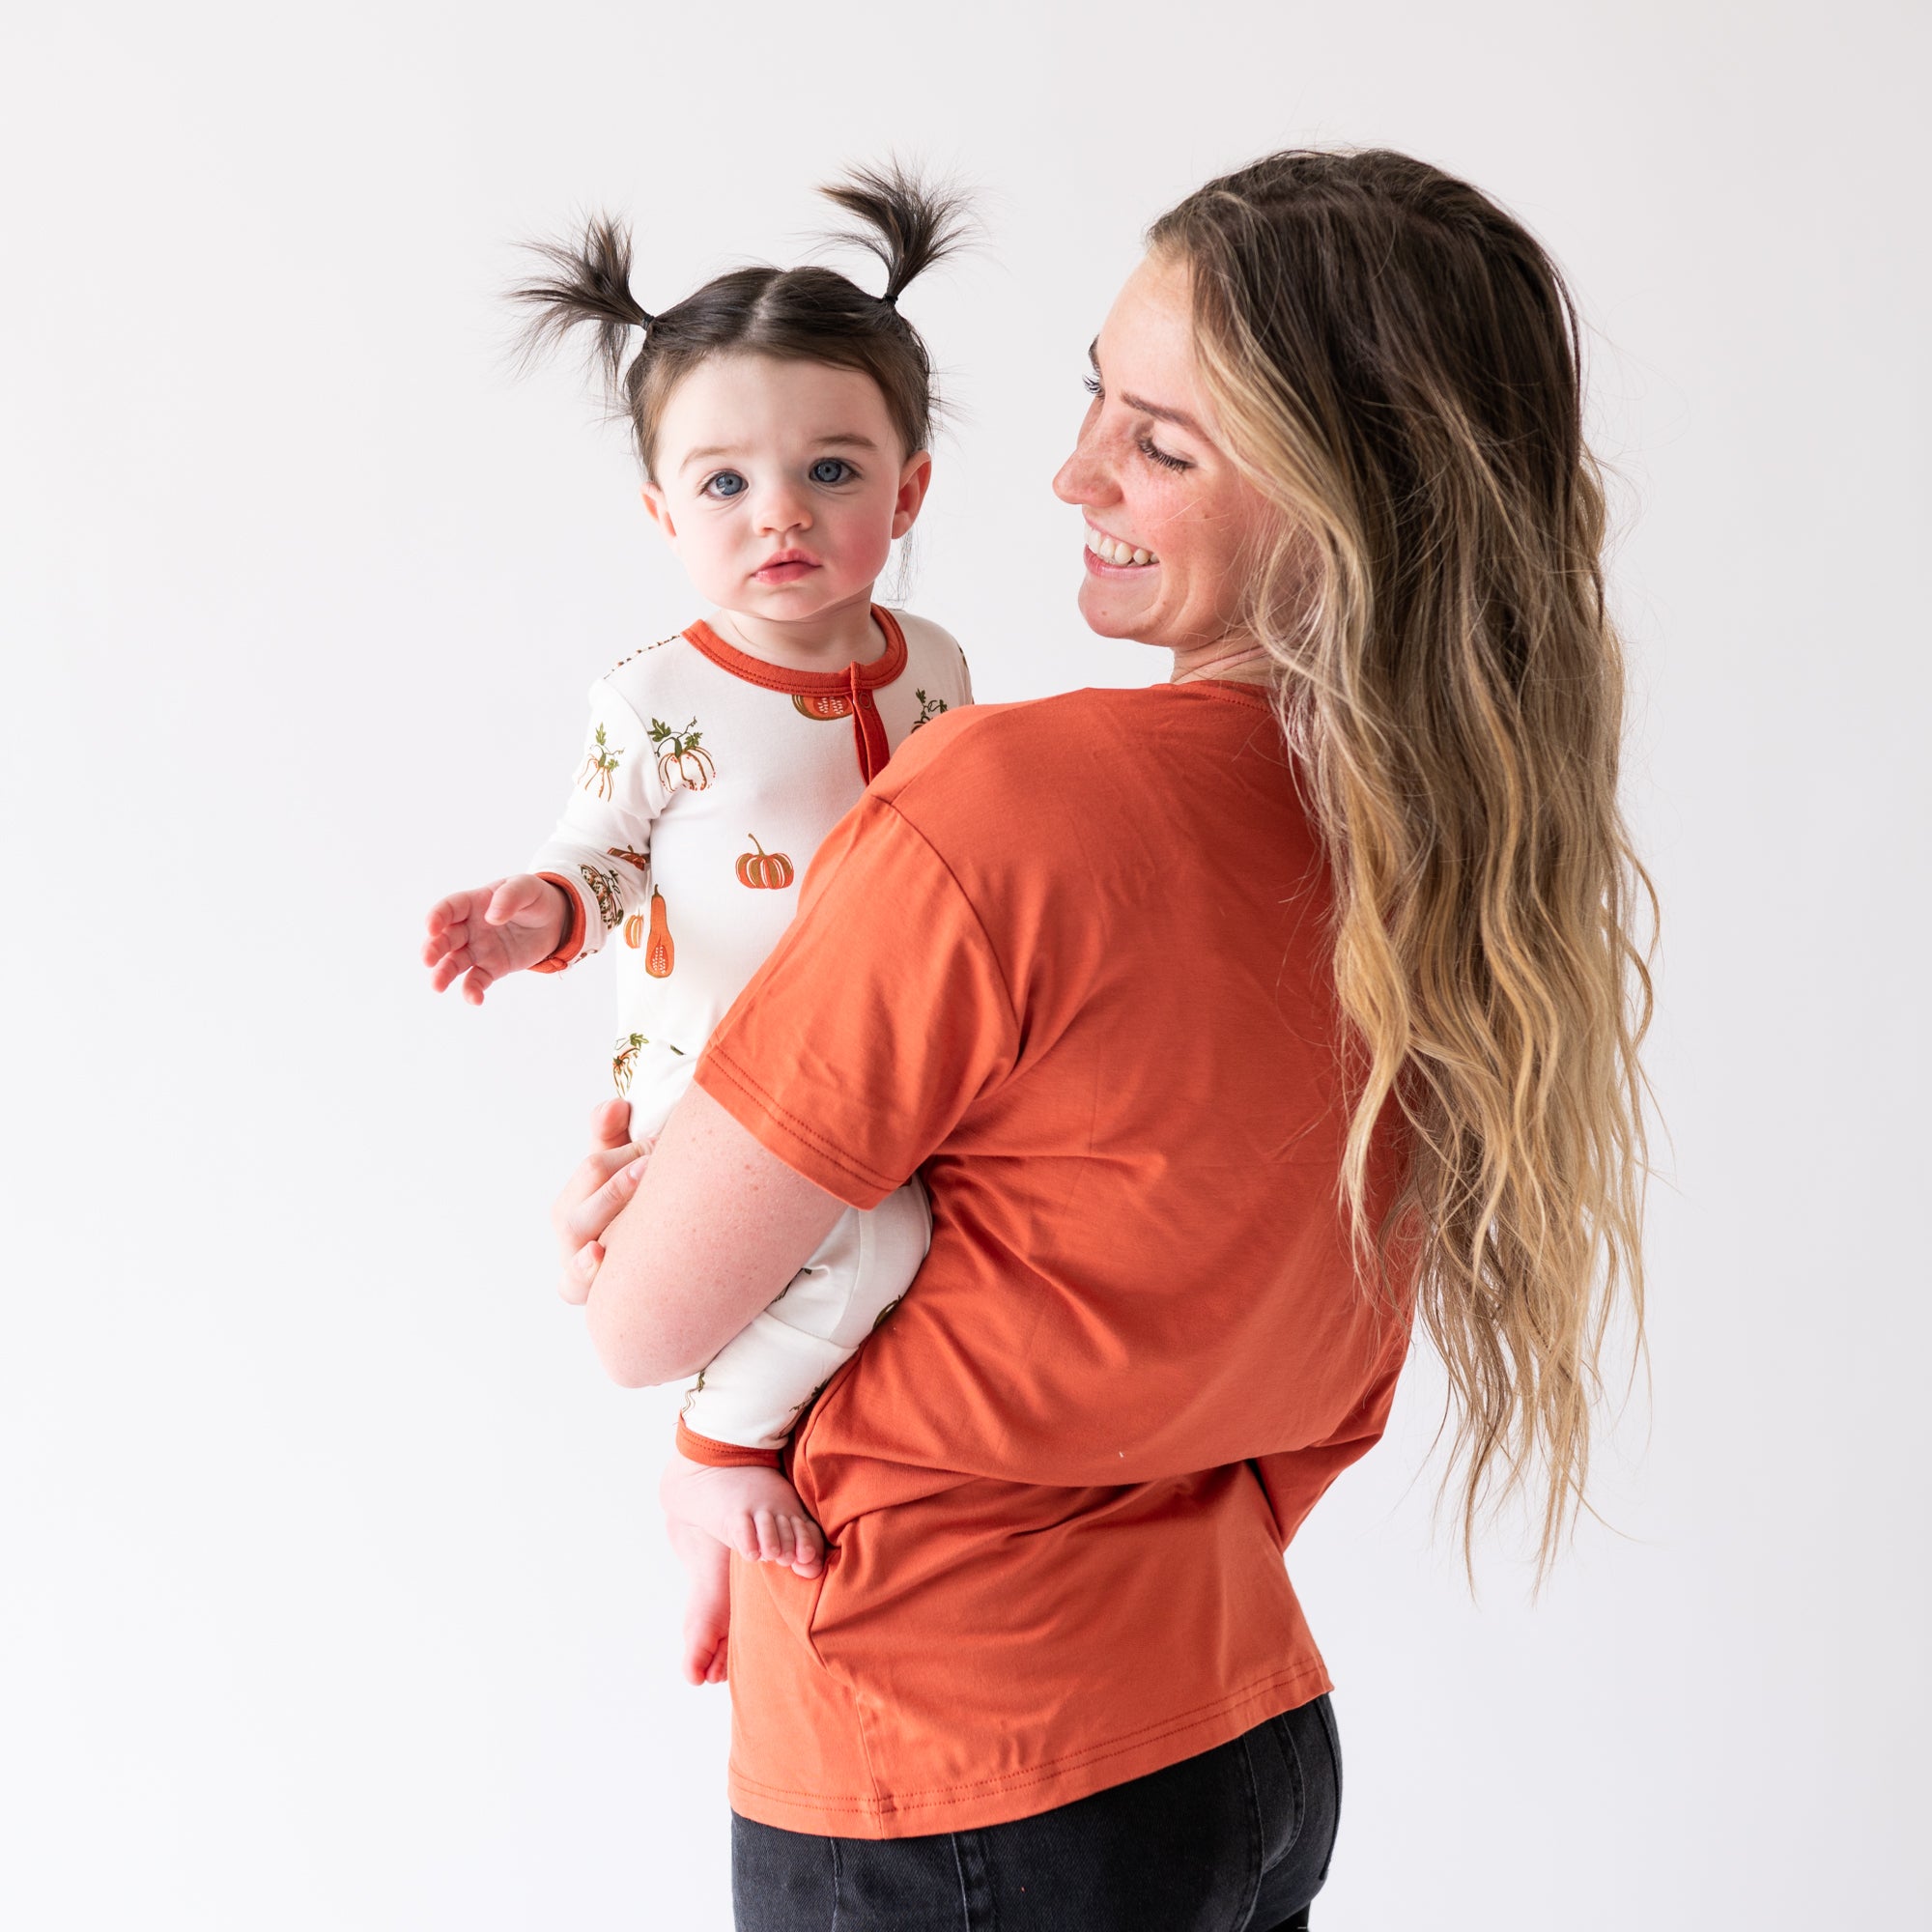 Mom wearing Clementine V-Neck Shirt Holding Baby Wearing a Snap Pumpkin Romper